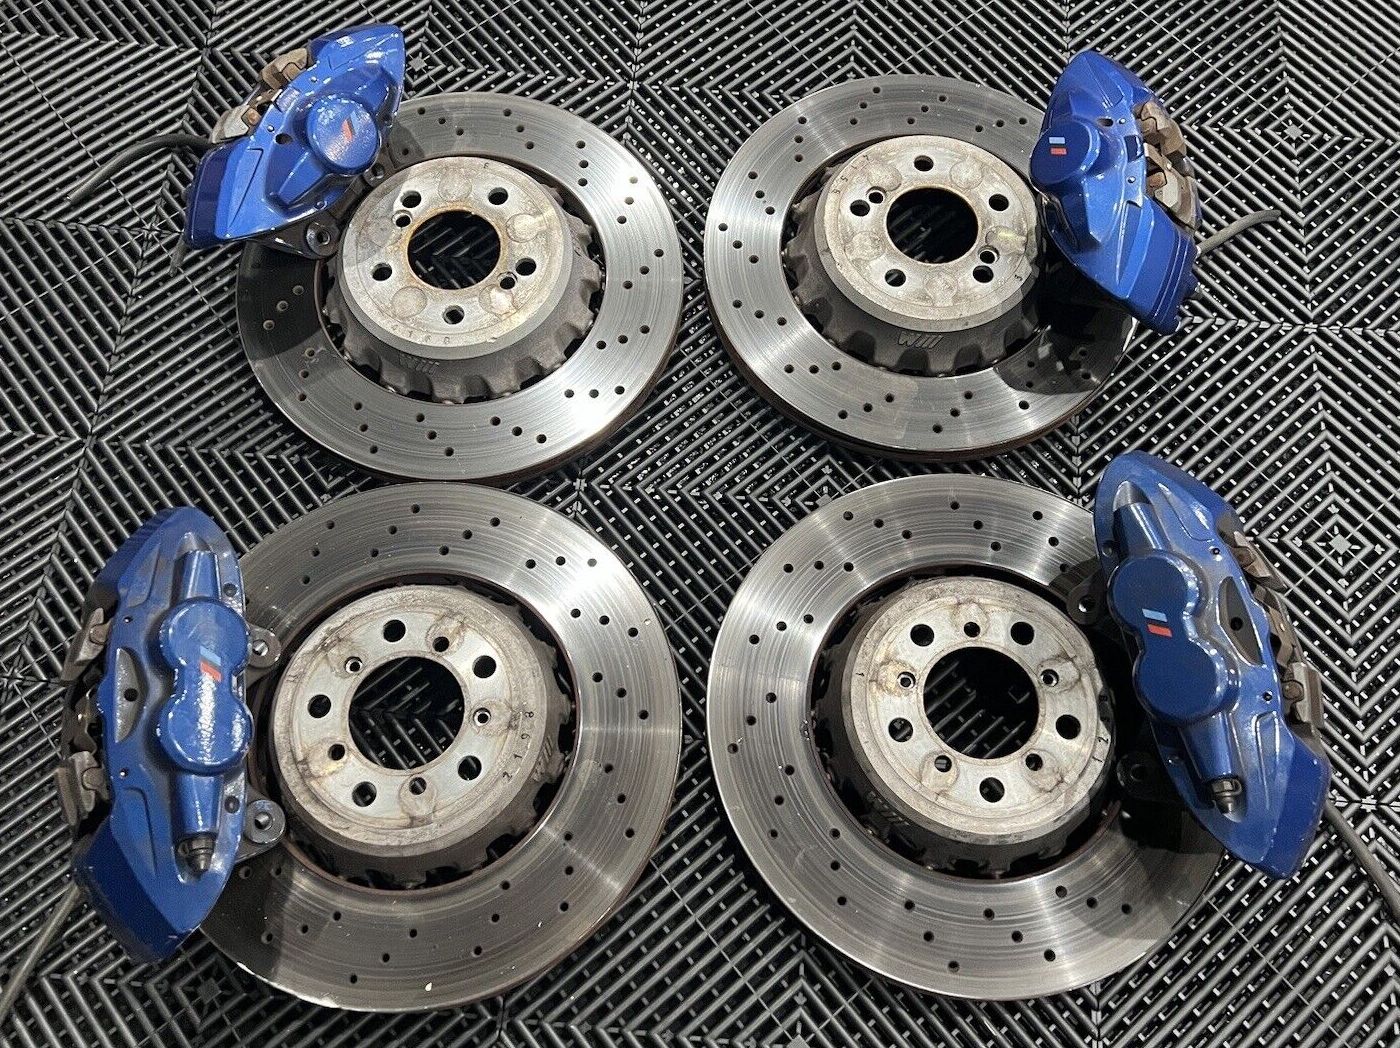 Car Disc Brake Cleaning For Improved Performance